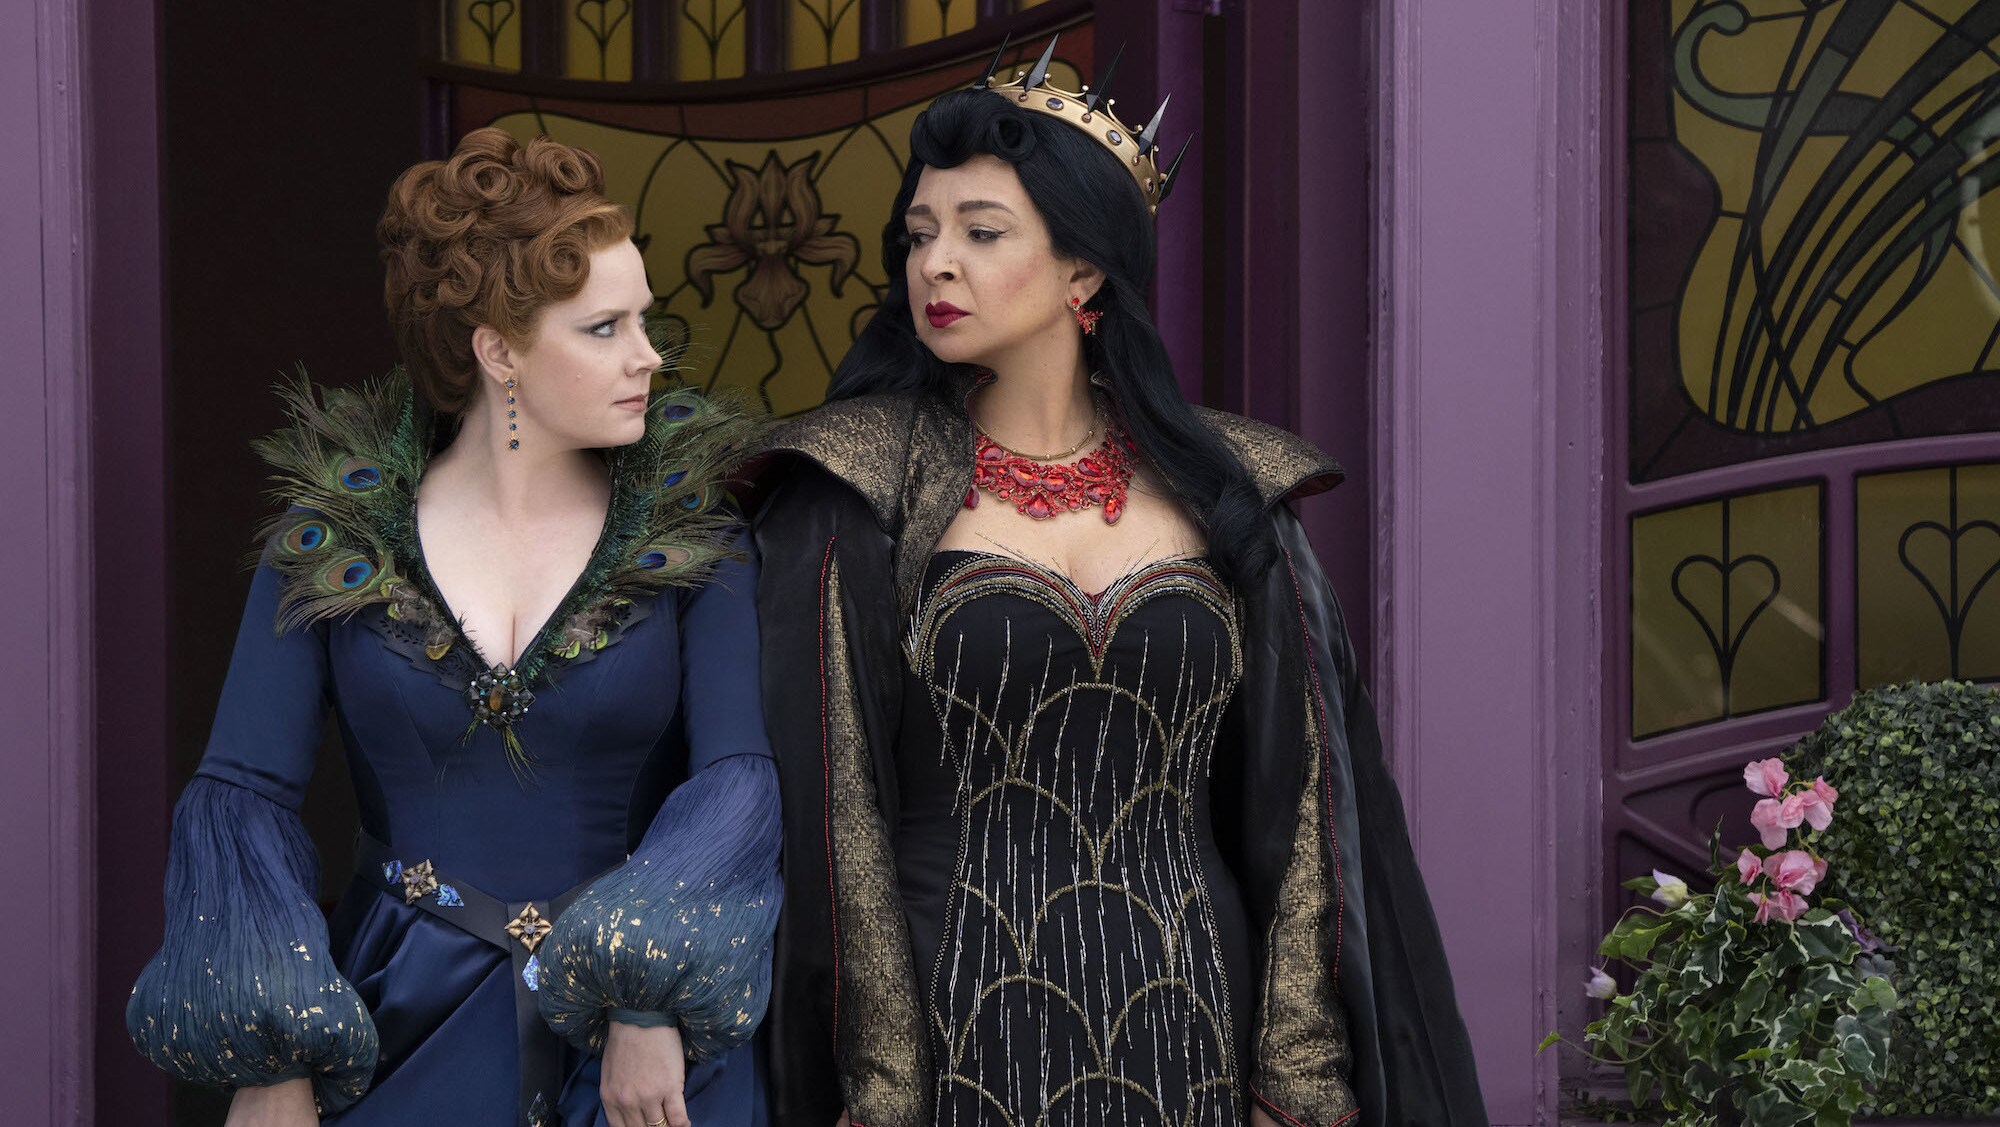 (L-R): Amy Adams as Giselle and Maya Rudolph as Malvina Monroe in Disney's live-action DISENCHANTED, exclusively on Disney+. Photo by Jonathan Hession. © 2022 Disney Enterprises, Inc. All Rights Reserved.